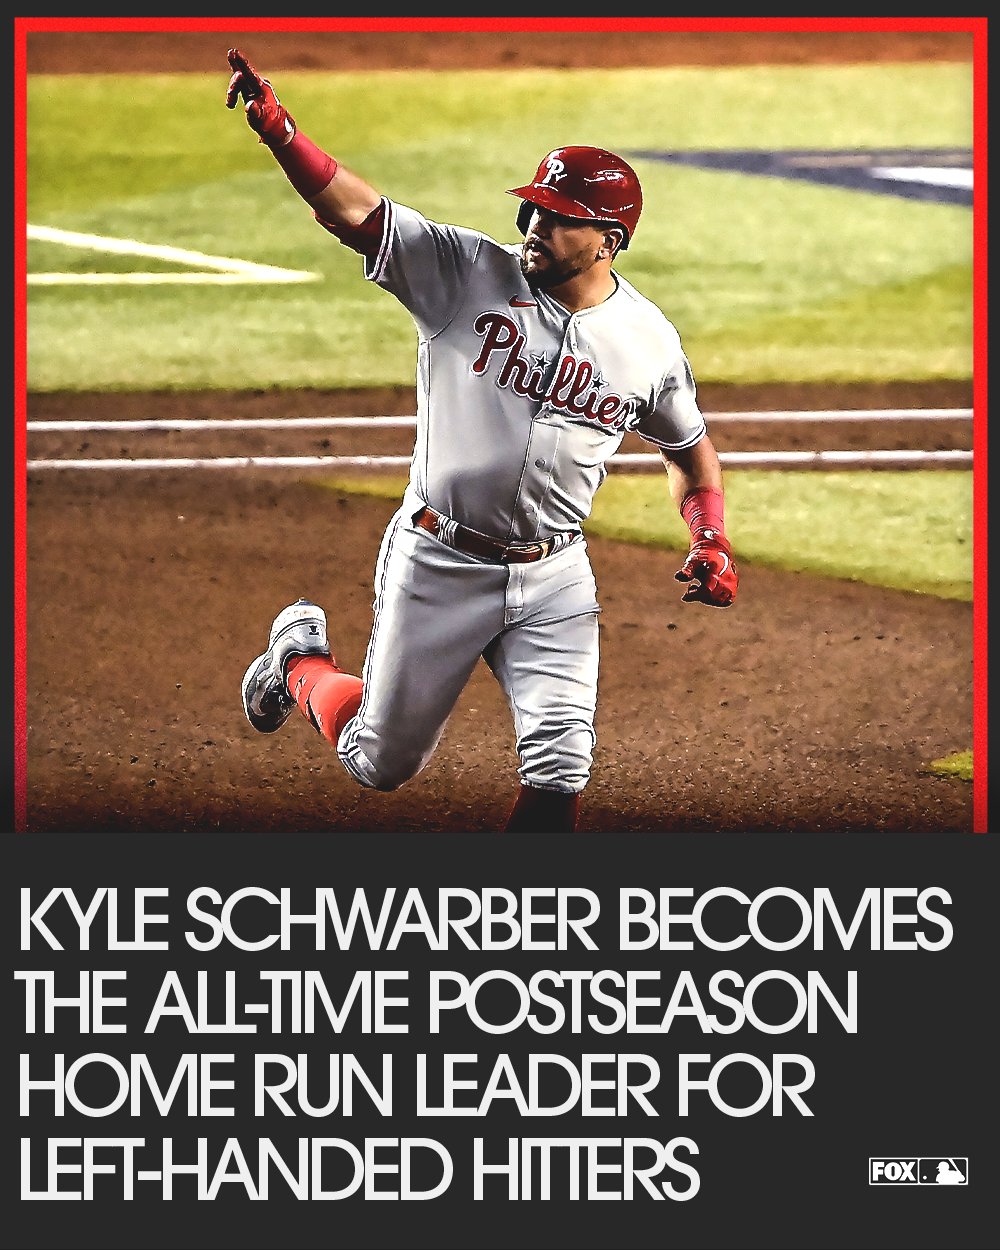 FOX Sports: MLB on X: With Kyle Schwarber's home run in the 4th